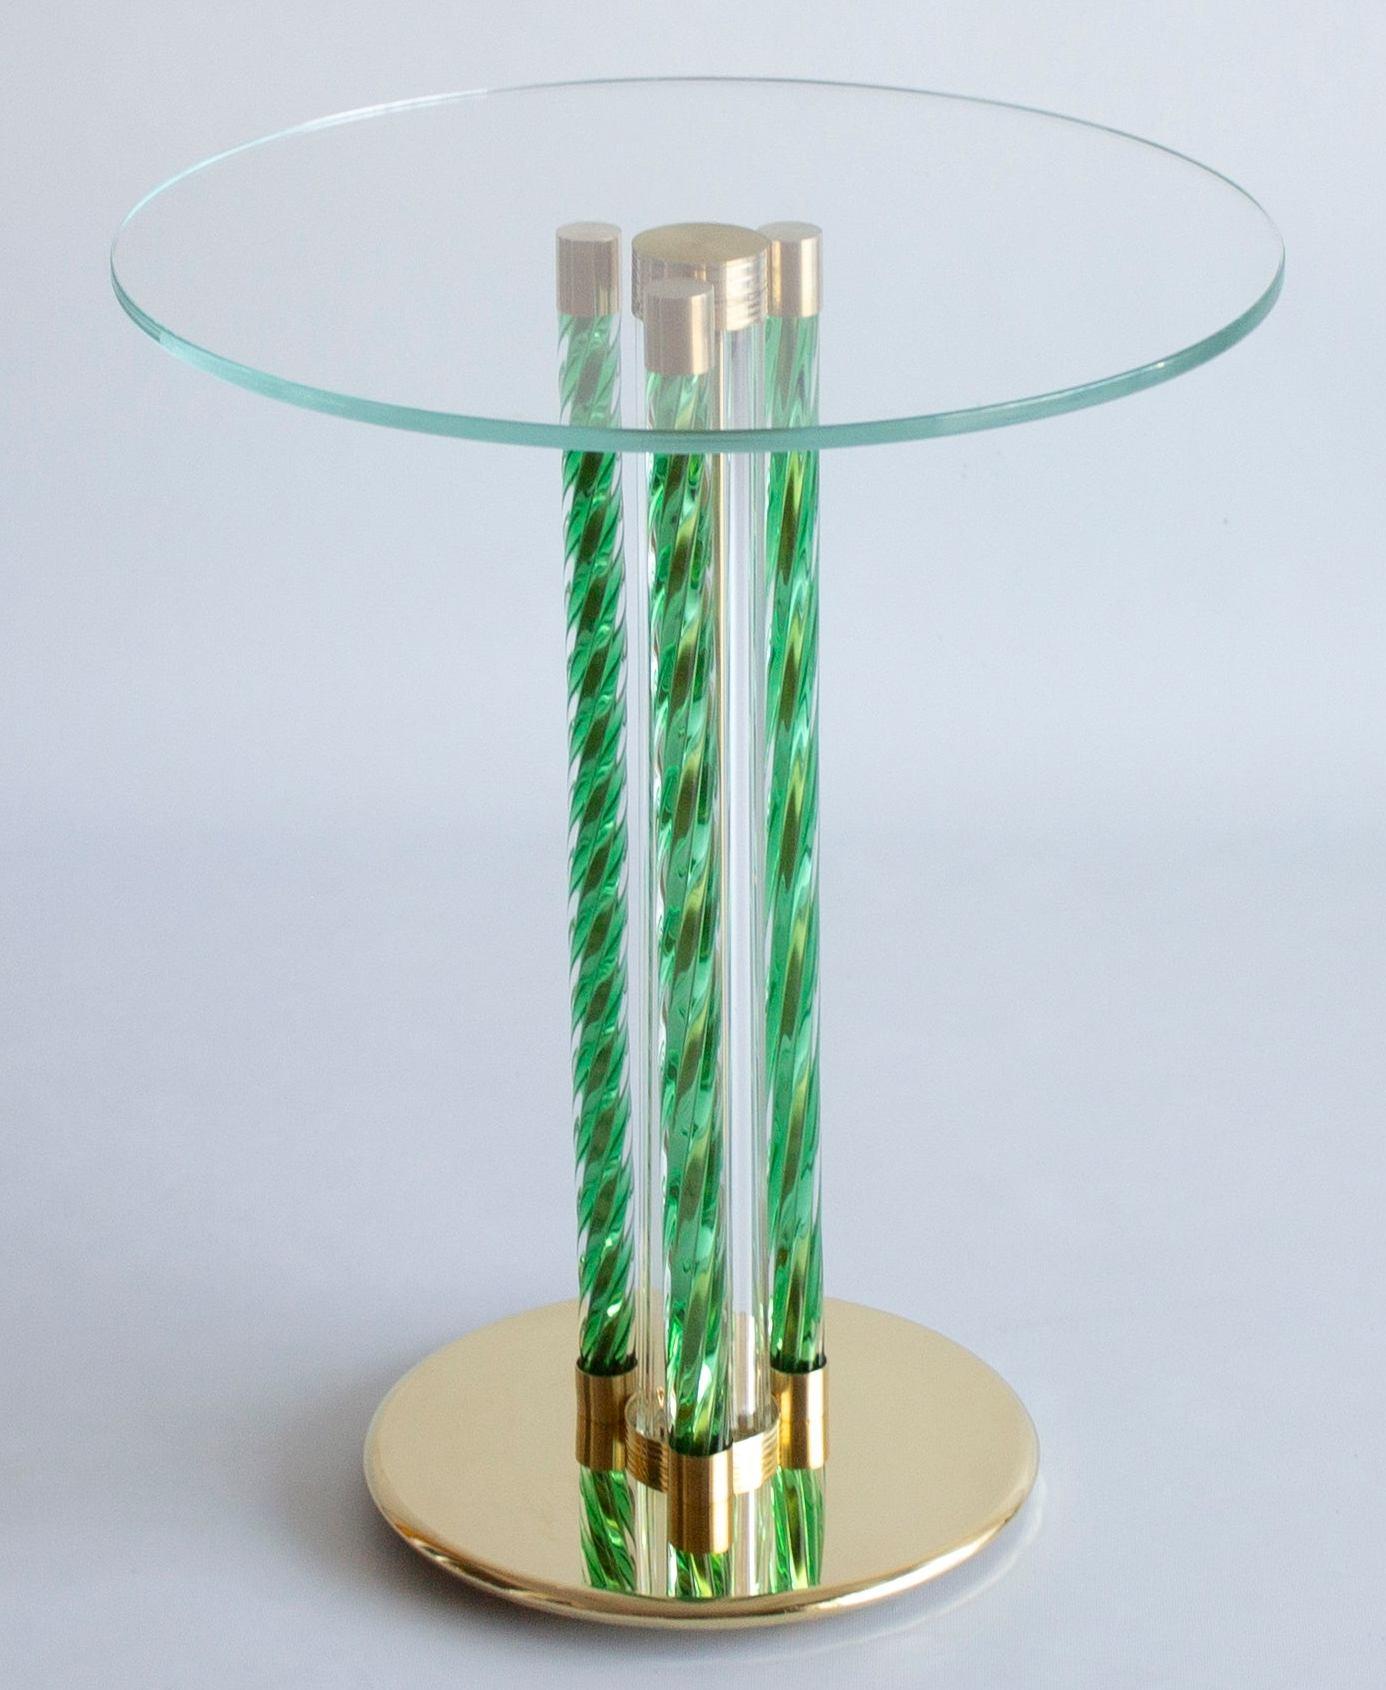 Elegant green cocktail table in blown Murano glass and brass frame Italy Contemporary.
This coffee table is a work of art composed by three main twisted pillars in green color entirely handcrafted in blown Murano glass. In the very center another